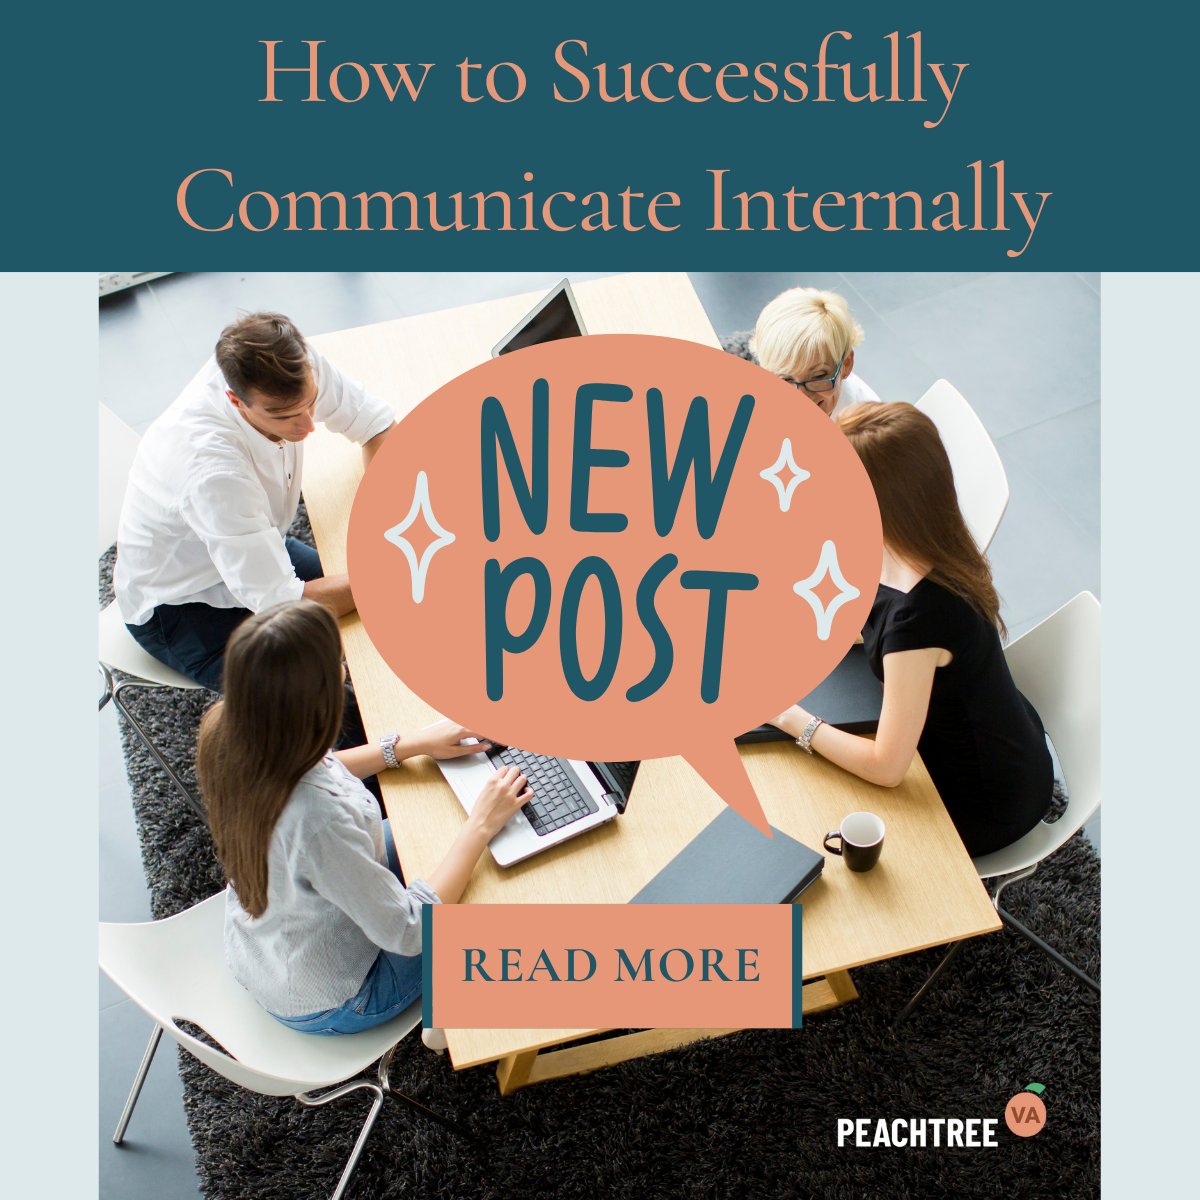 📢✨ Exciting news! 📚 

Our latest blog post 'How To Successfully Communicate Internally' is out now! 

Click the link in the comments to read it now and start fostering stronger connections within your organization! ‘

#InternalCommunication #Teamwork #PeachtreeVA 🍑💬